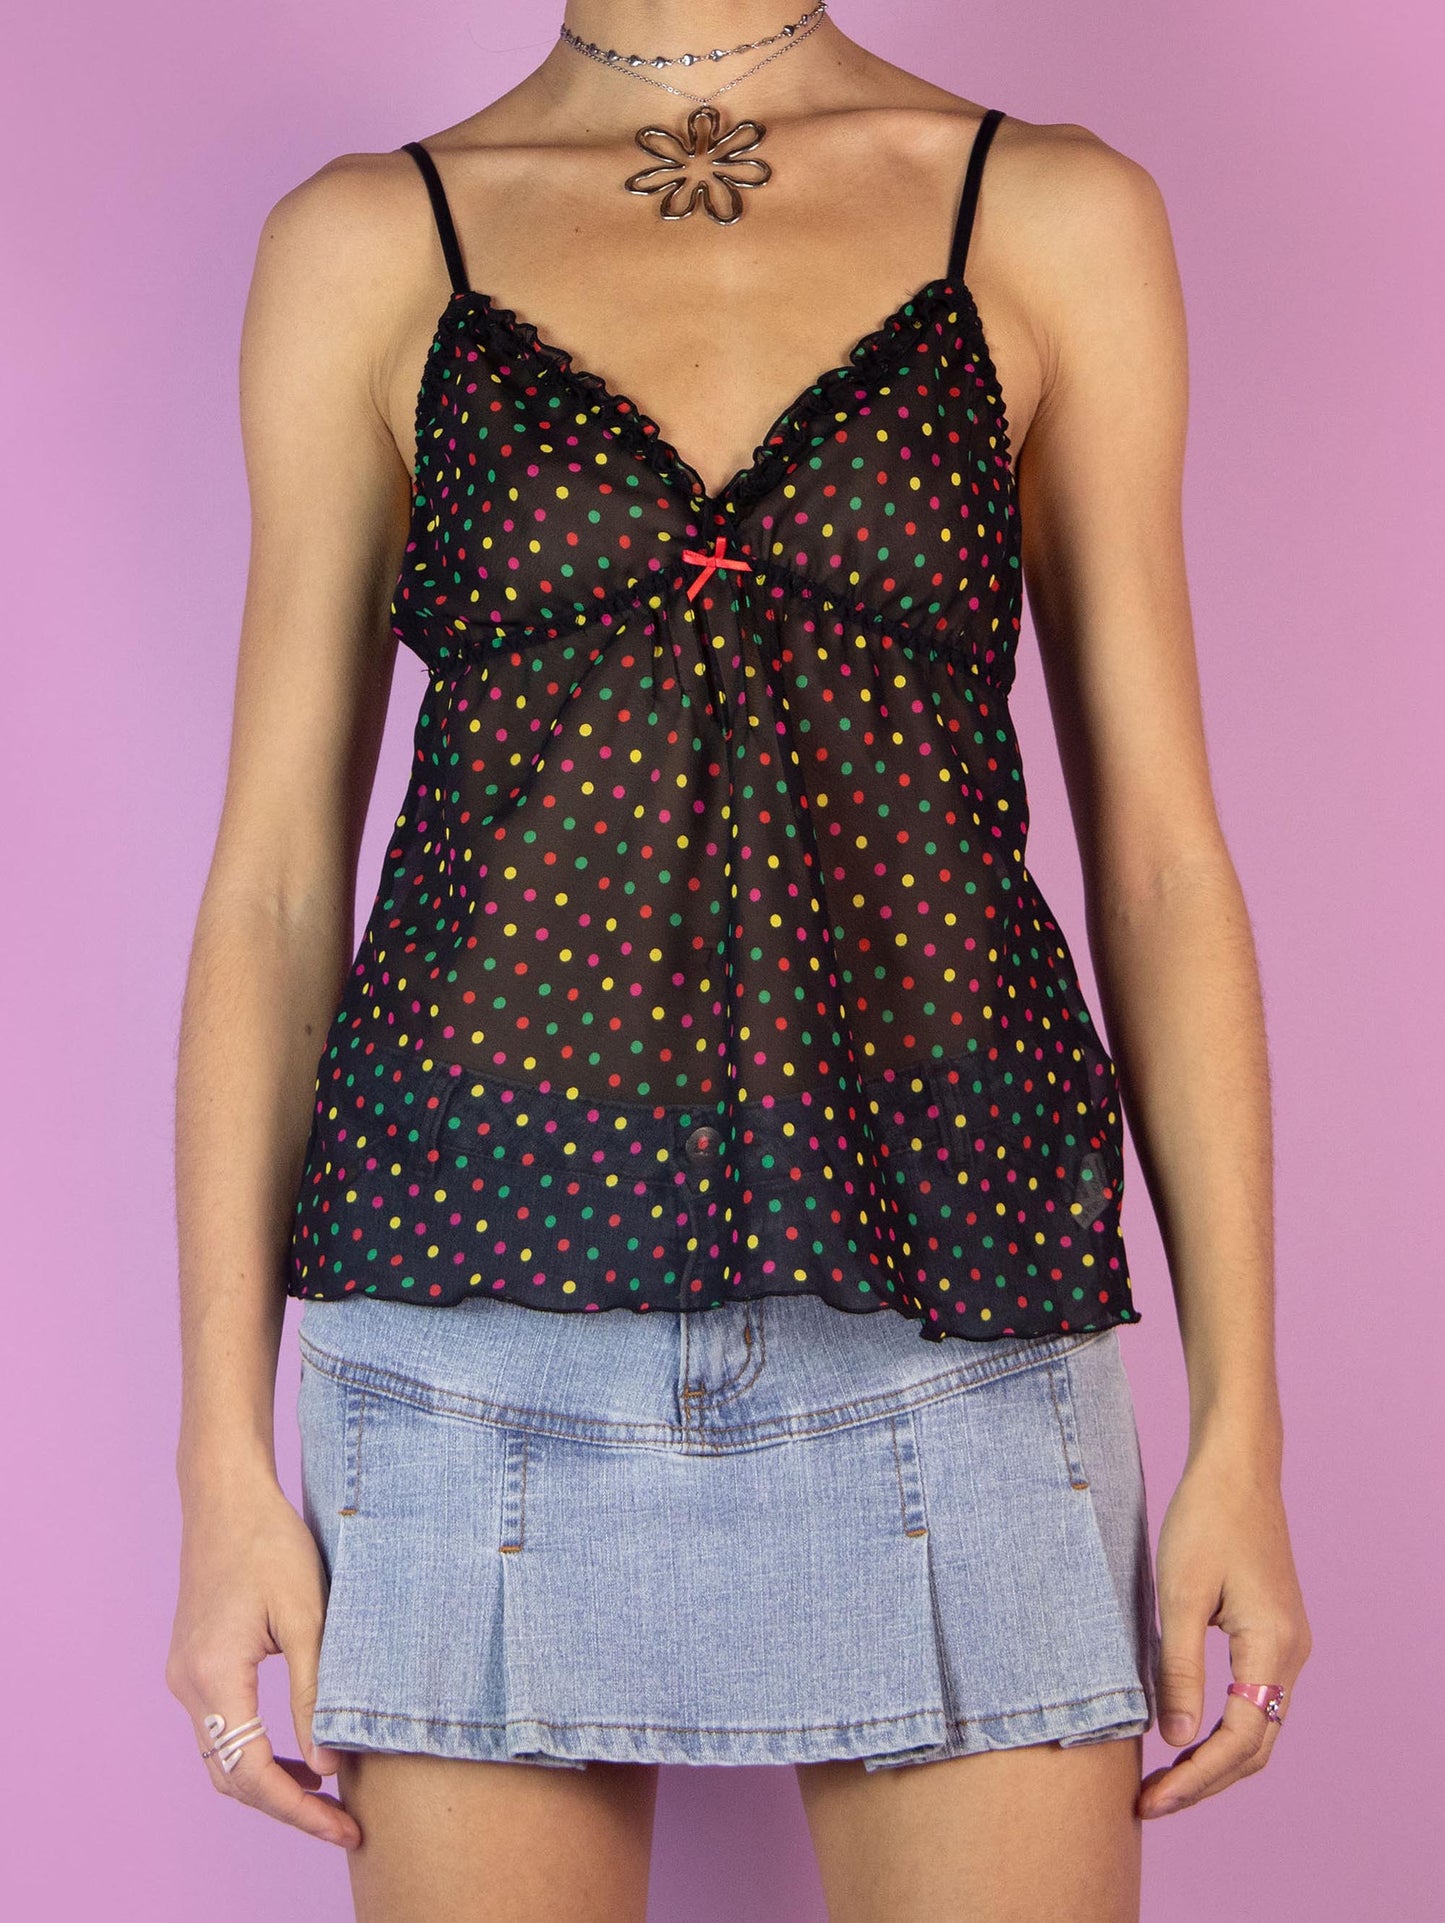 The Y2K Black Sheer Cami Top is a vintage semi-transparent camisole with a multicolored polka dot pattern, V-neckline, and adjustable straps. Romantic coquette 2000s tank top.